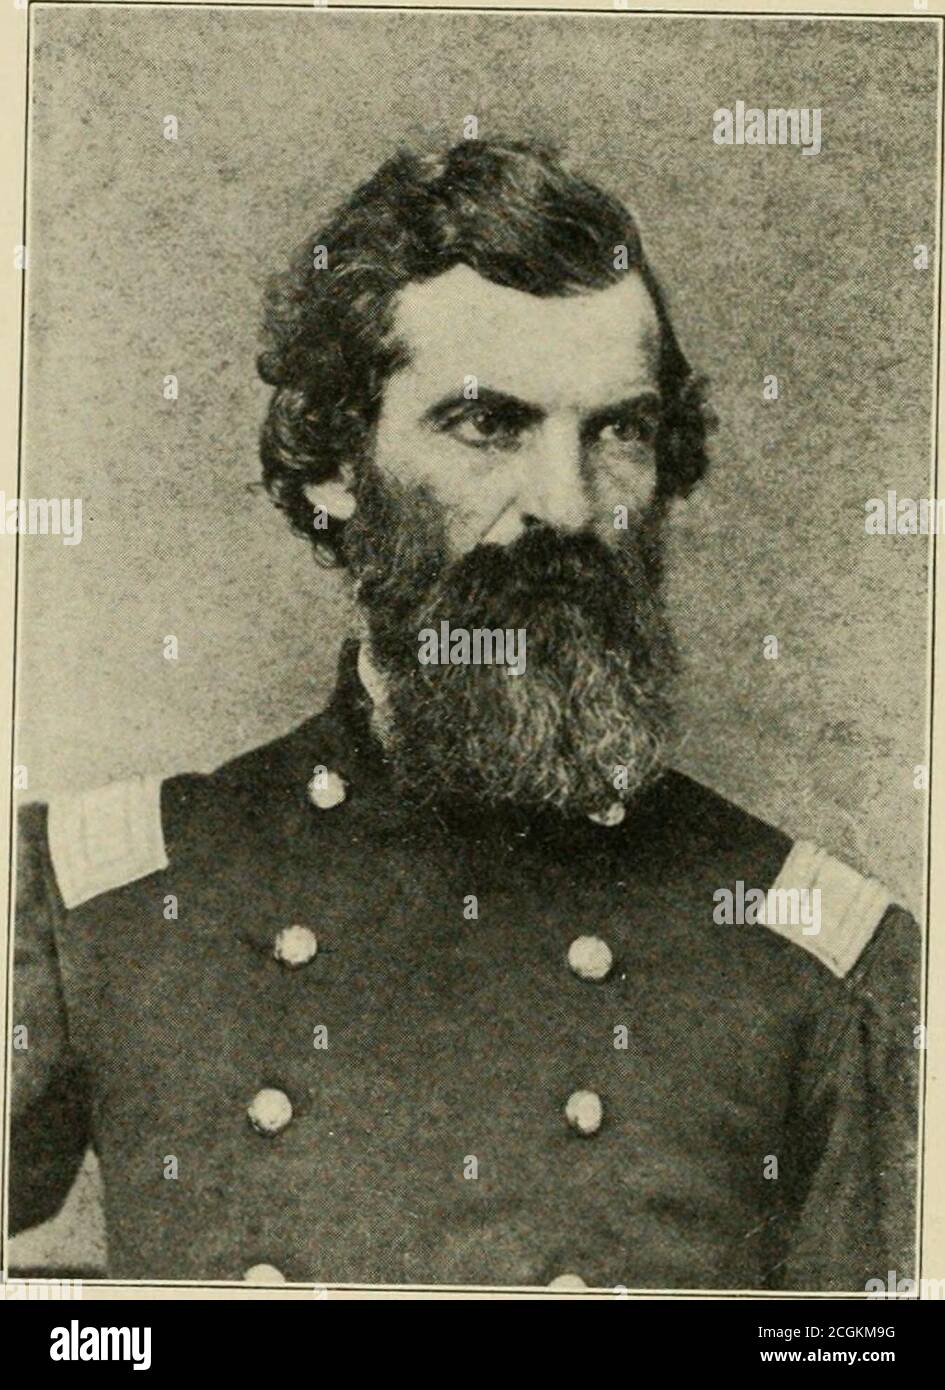 . Itinerary of the Seventh Ohio volunteer infantry, 1861-1864, with roster, portraits and biographies . EDWIN E. GREEN DAkPS ACA-AZt /. MAJOR GENERAL JOHN W. SPRAGUE (Capt. Co. E, 7th O. V. I.—Maj. Gen. Vols.—Dipfl Dpi-. 24th, 1893.) Facinc oaee COMPANY E. JOHN WILSON SPRAGUE. Gen. John Wilson Spragiic was born April 4. 1817, atWhite Creek. Washington County, N. Y. Educated in com-mon schools, and entered Rensselaer Polytechnic Institute,Troy, N. Y., in 1830, but was not graduated. In 1845 re-moved to Huron. Erie County, Ohio, and engaged in mer-cantile business. In 1851-52 was treasurer of Er Stock Photo